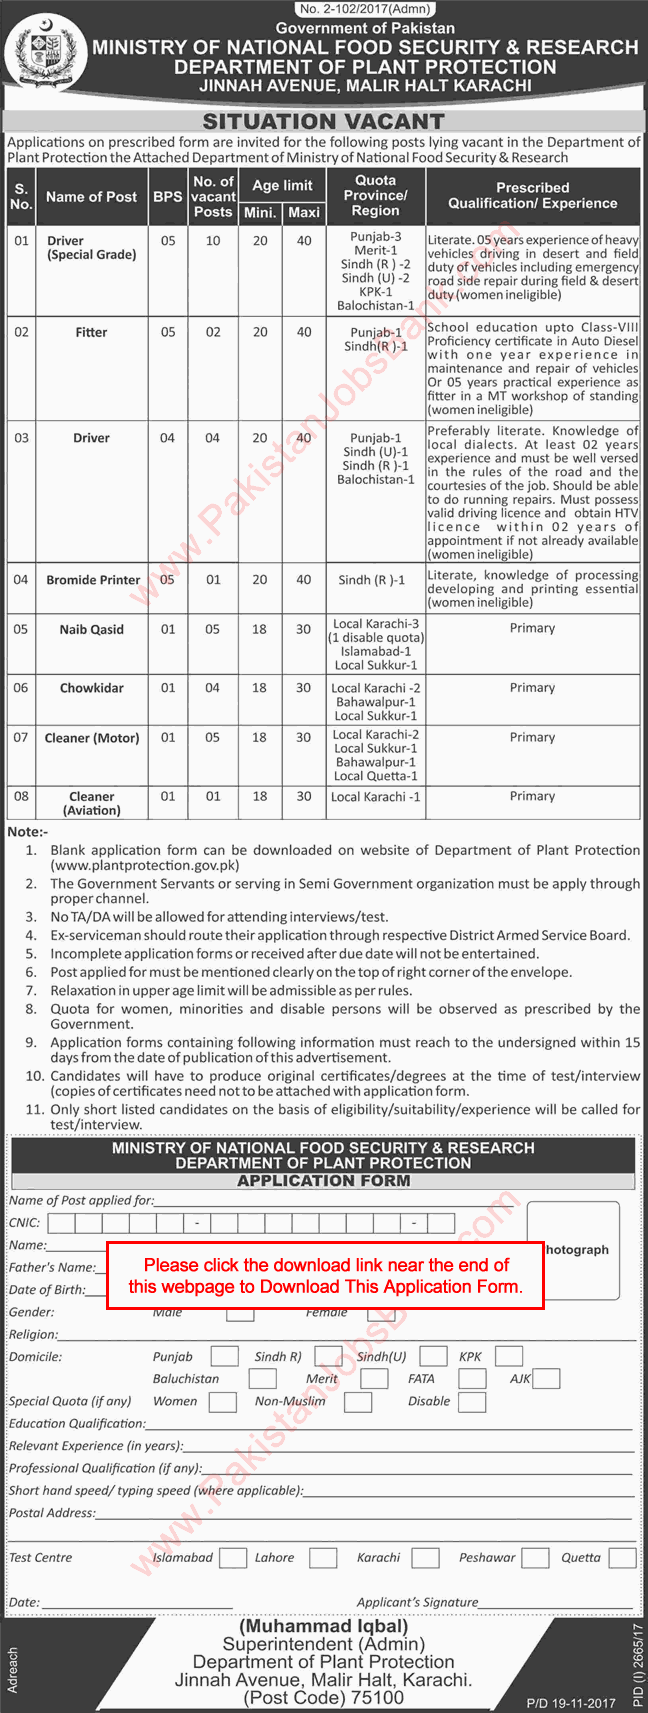 Ministry of National Food Security and Research Jobs November 2017 Application Form Plant Protection Department Latest